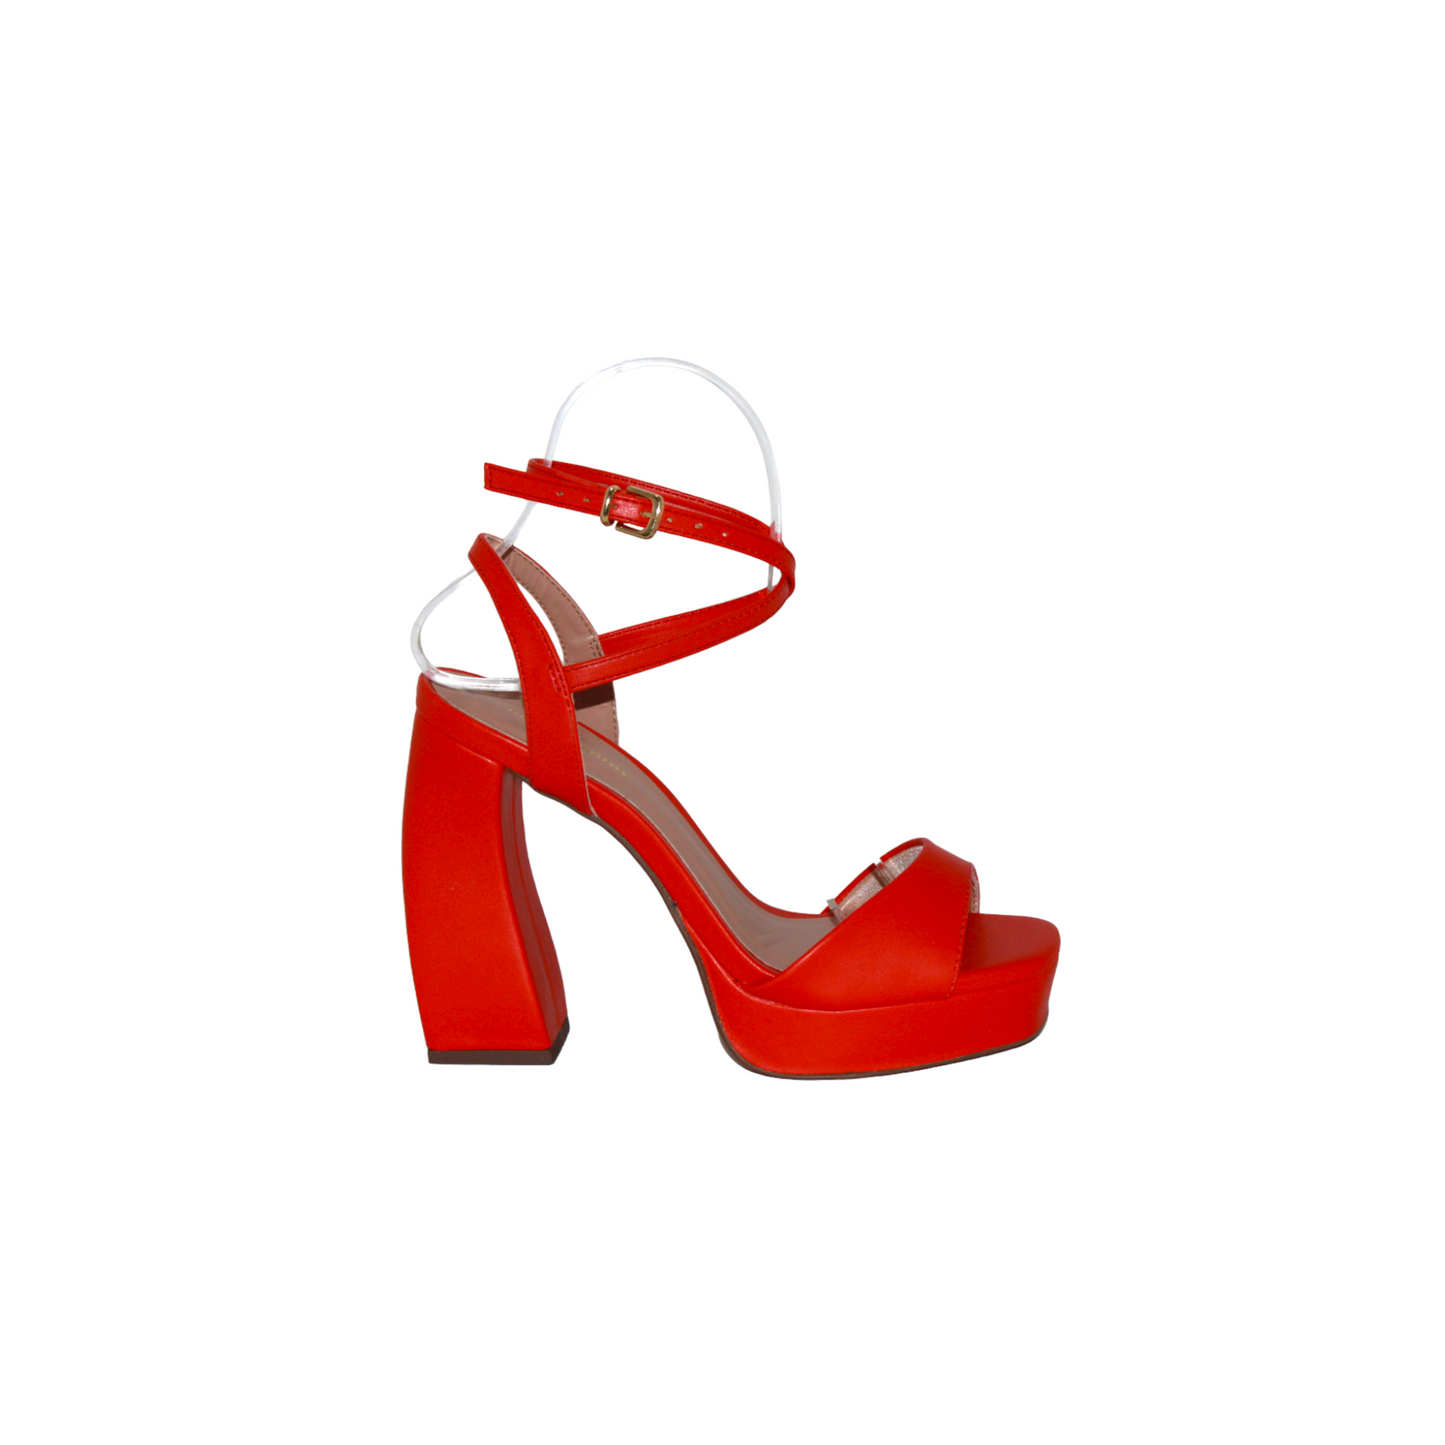 Open Toe Platform Heel with Ankle Strap